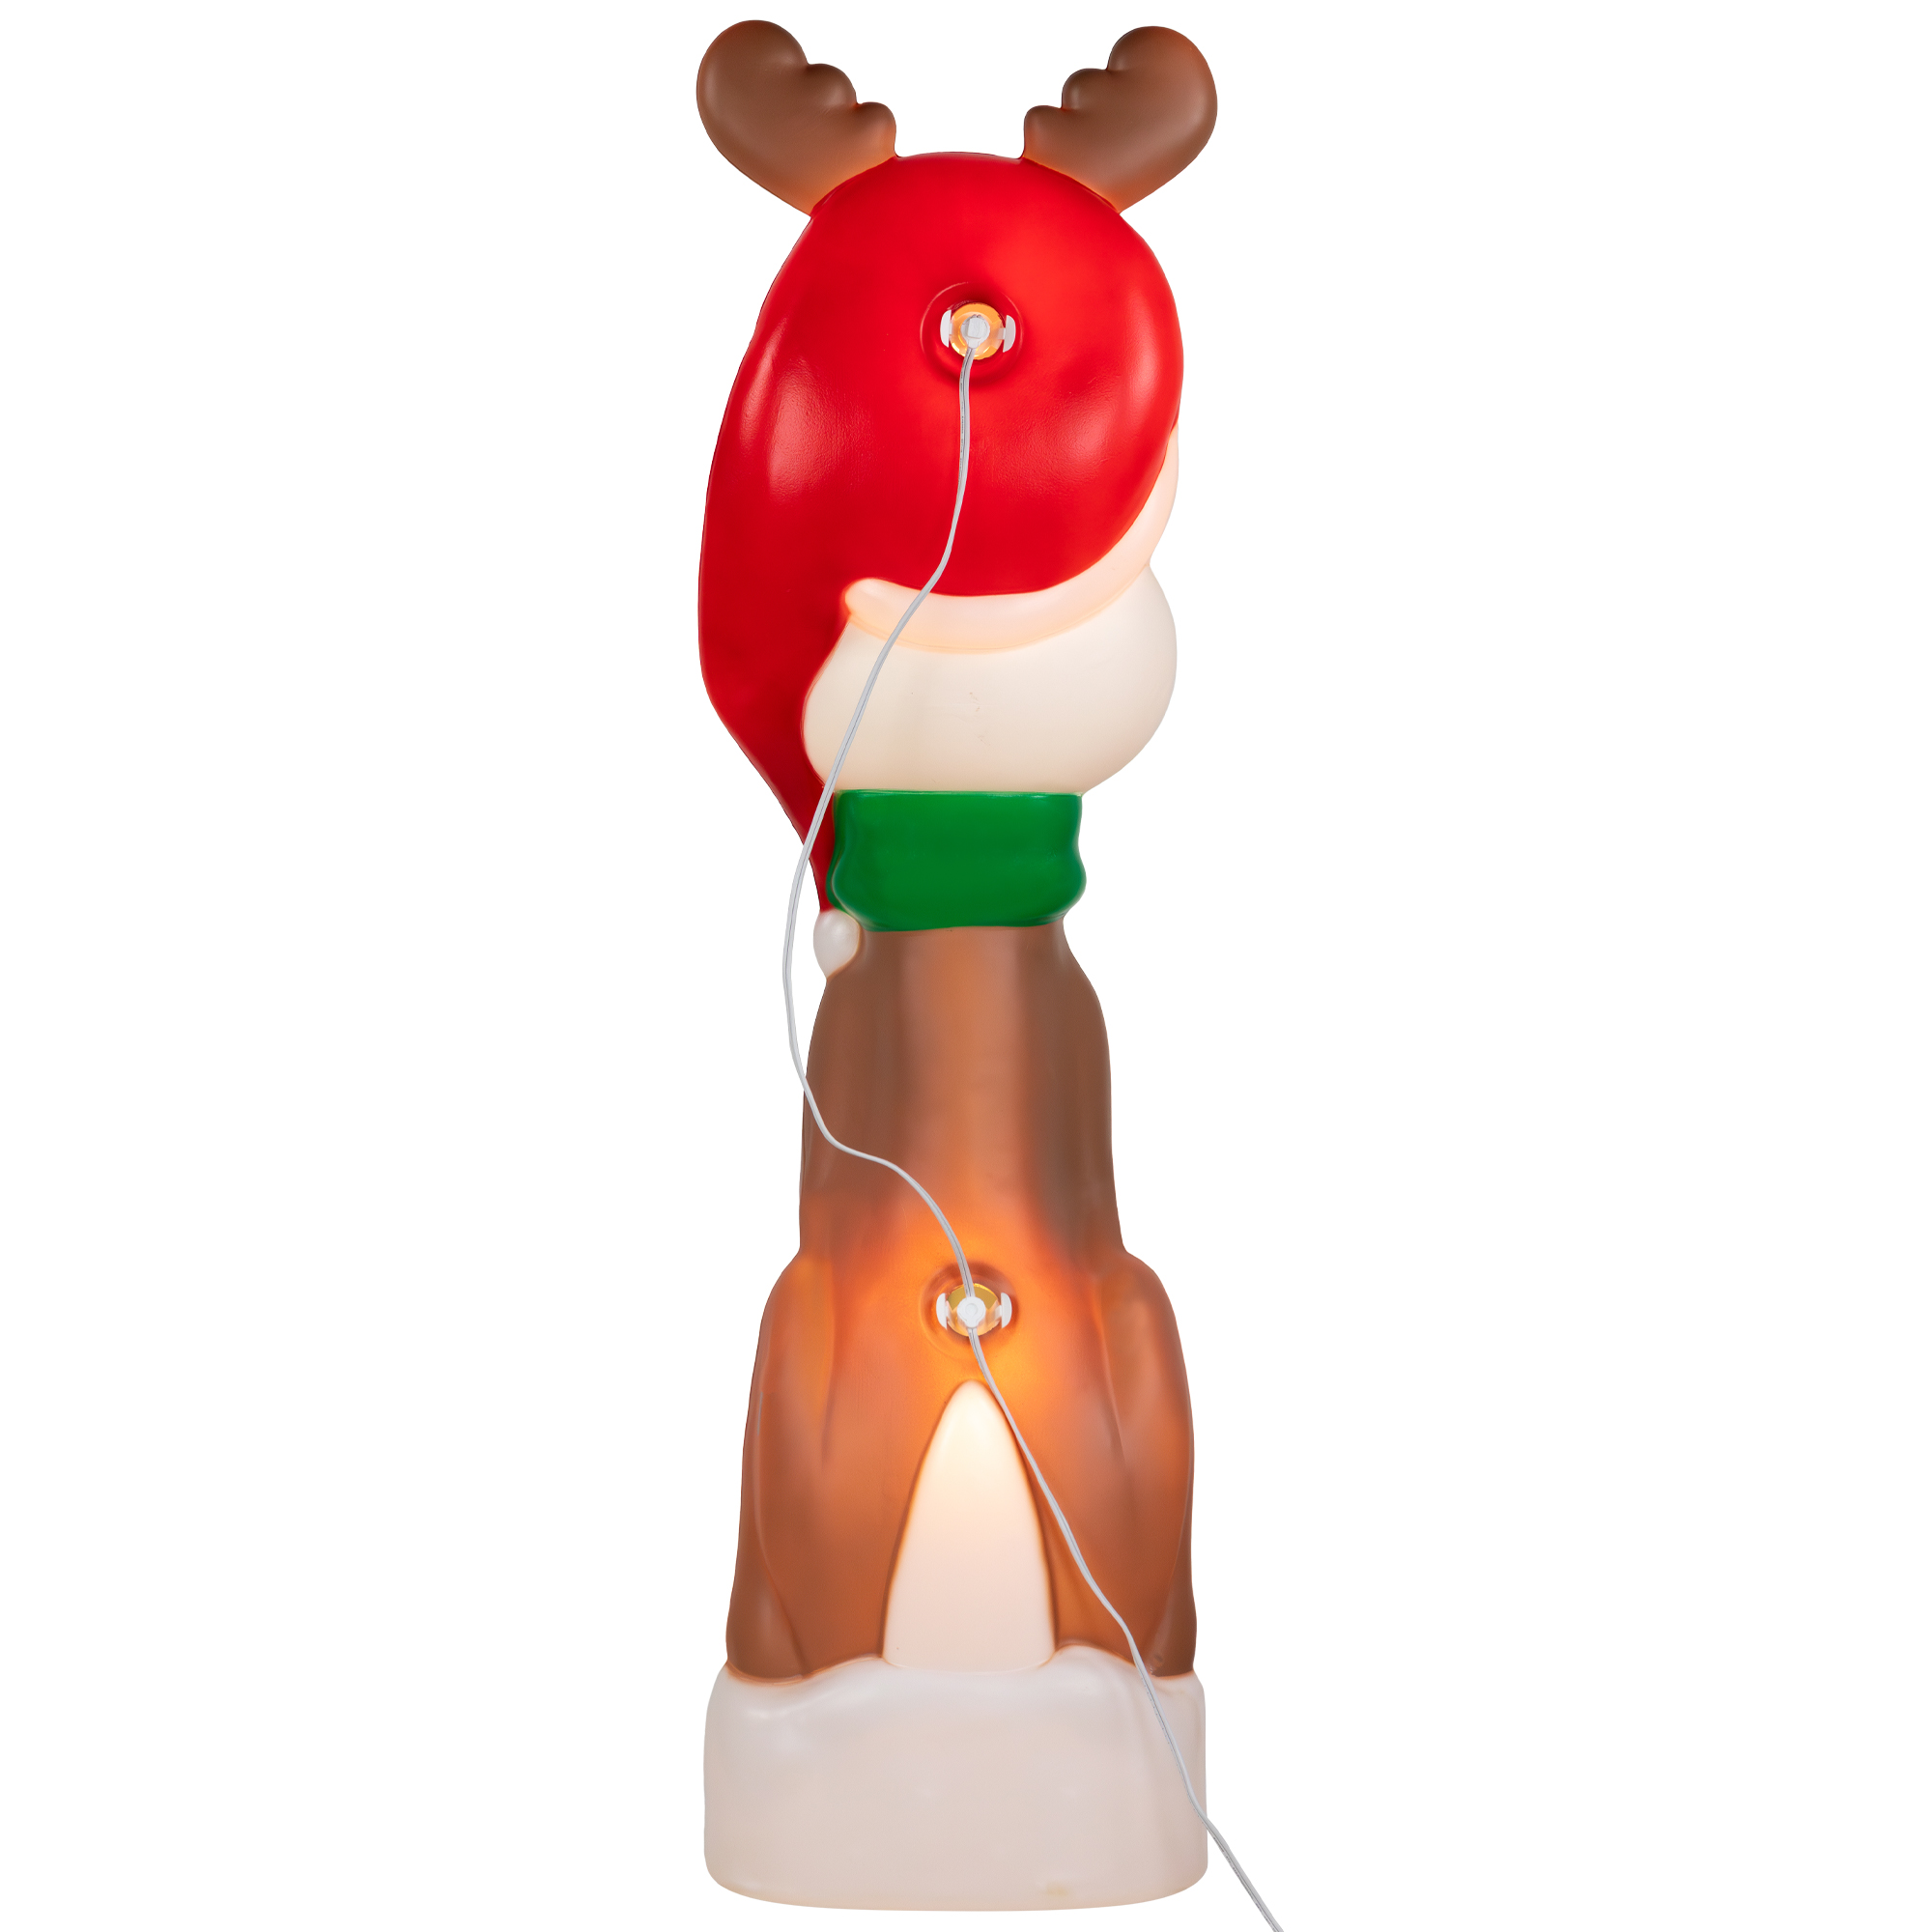 Northlight 40" Lighted Blow Mold Reindeer Outdoor Christmas Decoration